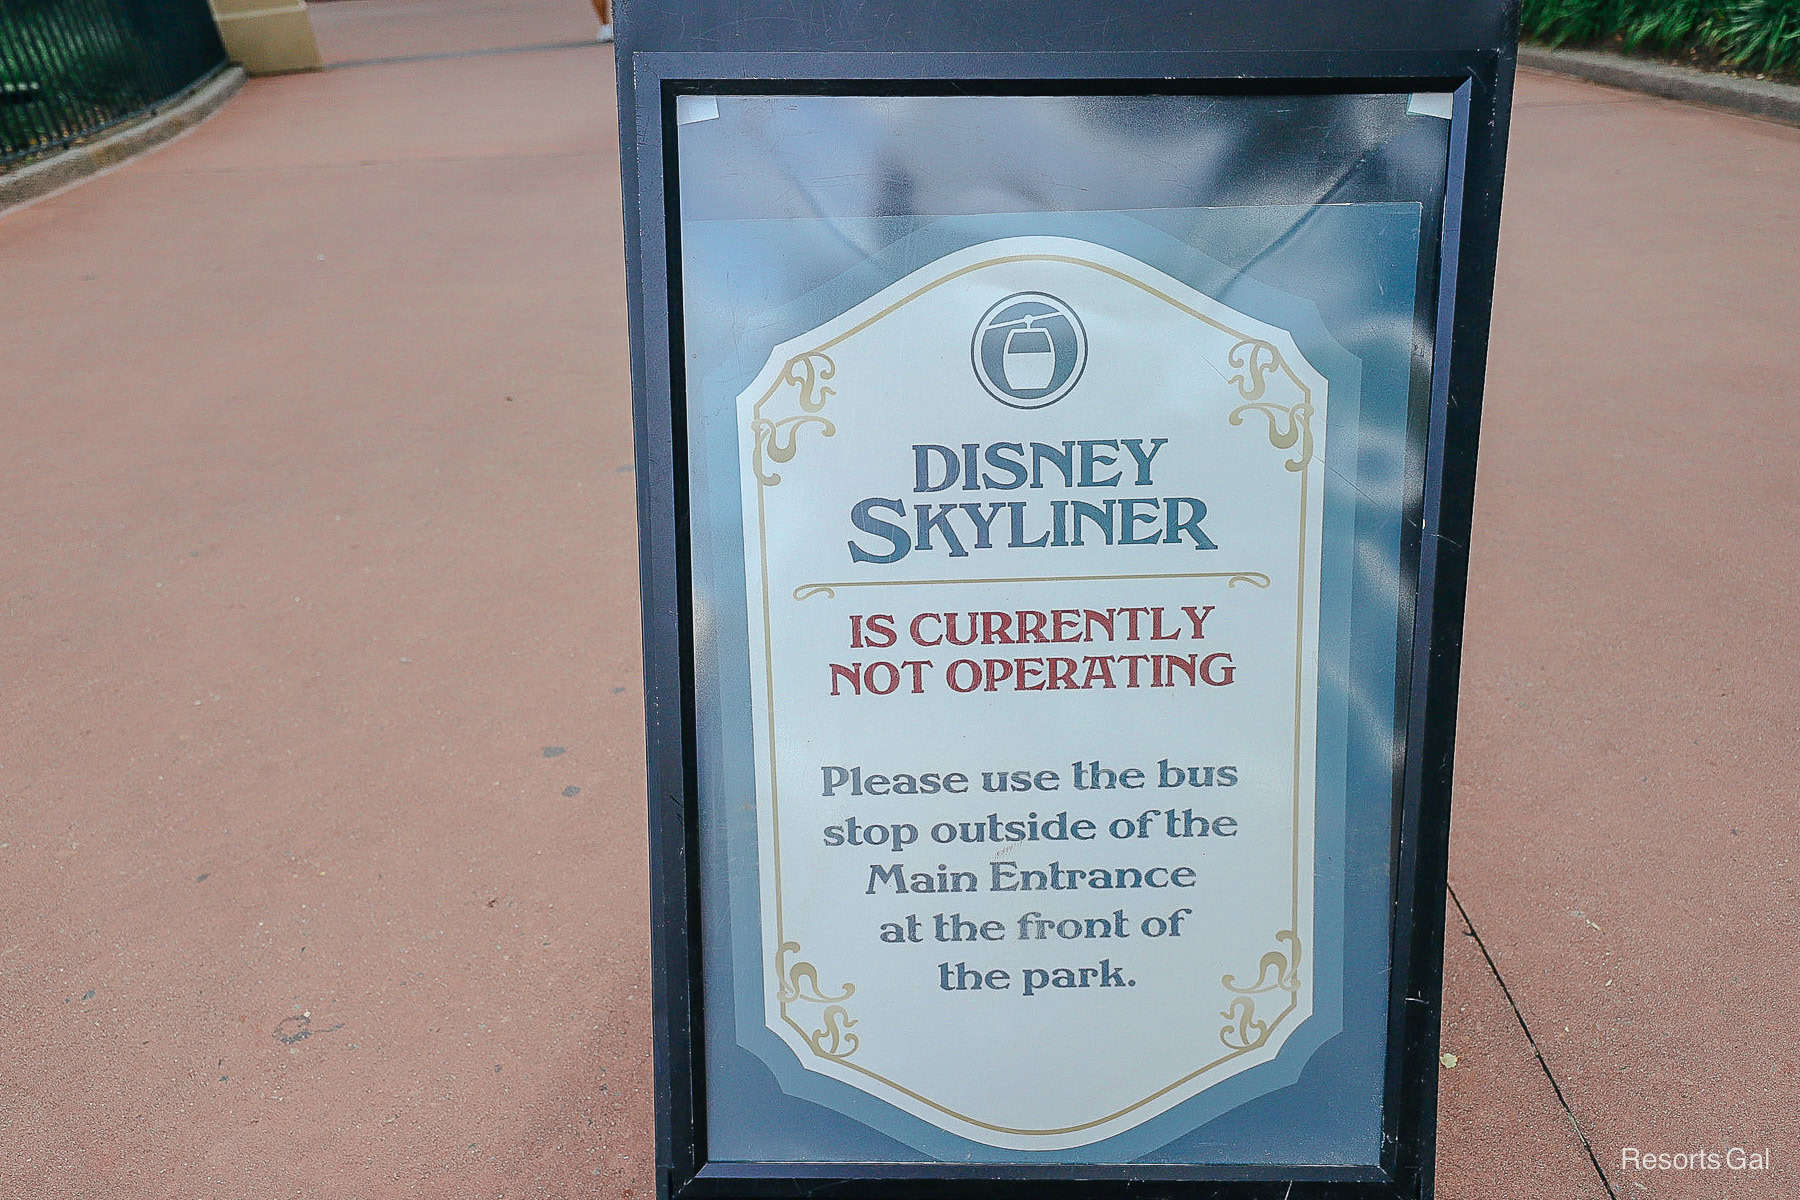 A sign that says the Disney Skyliner is currently not operating 